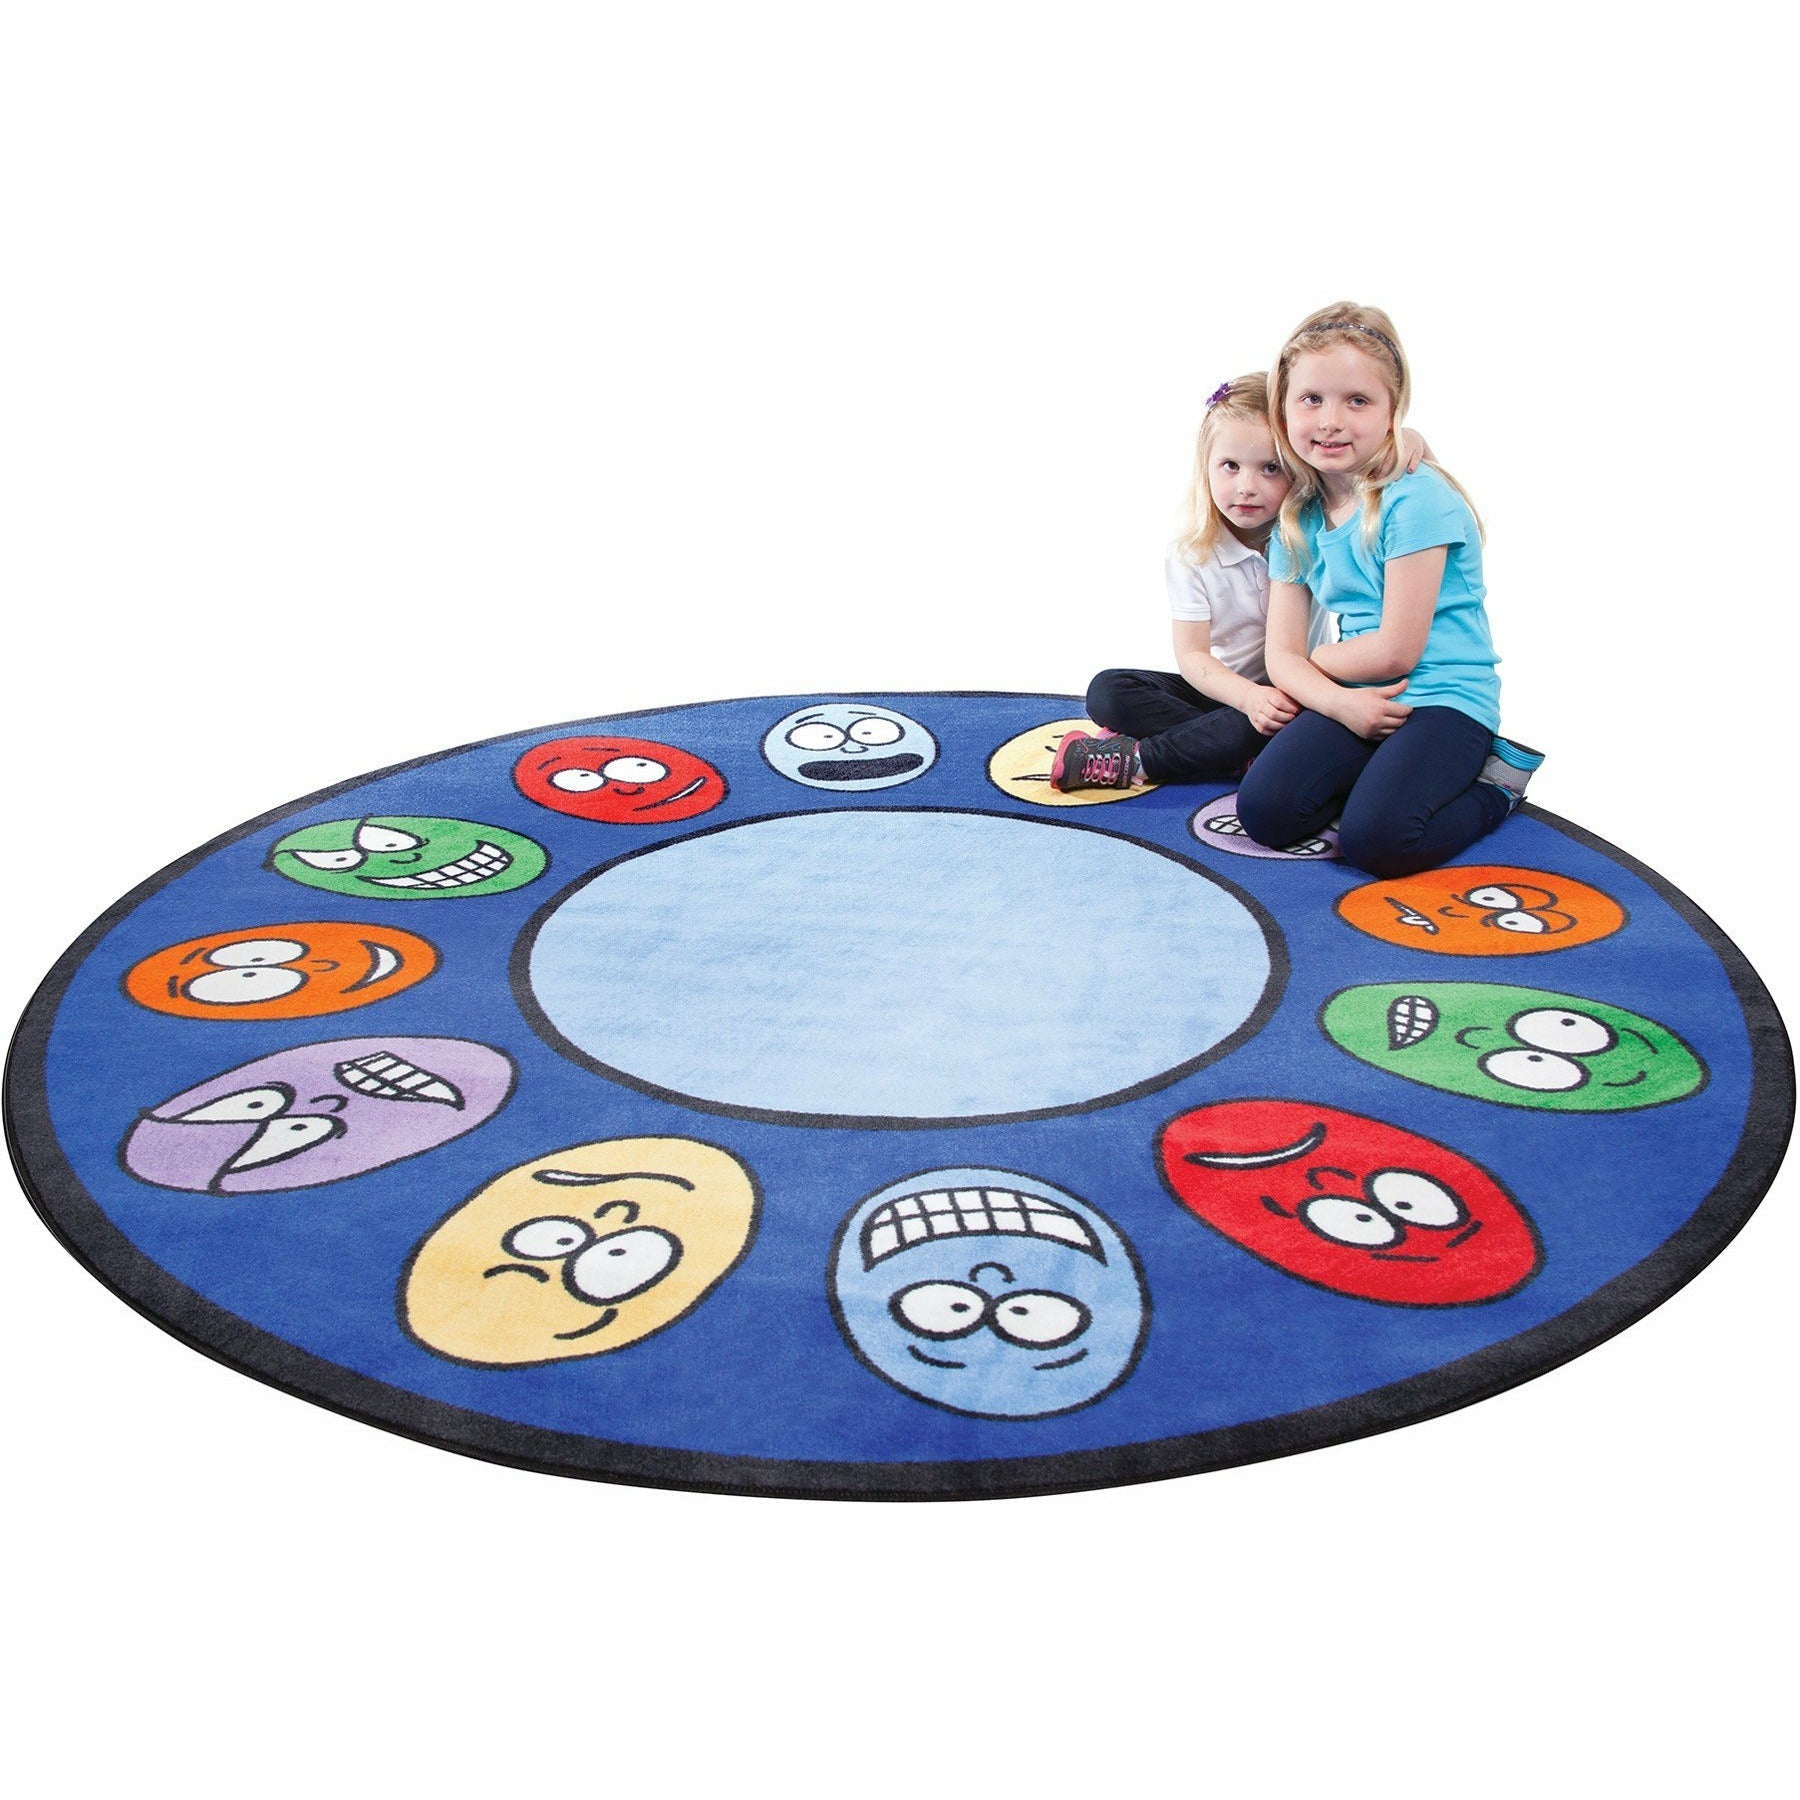 Expressions Rug, 9' Round